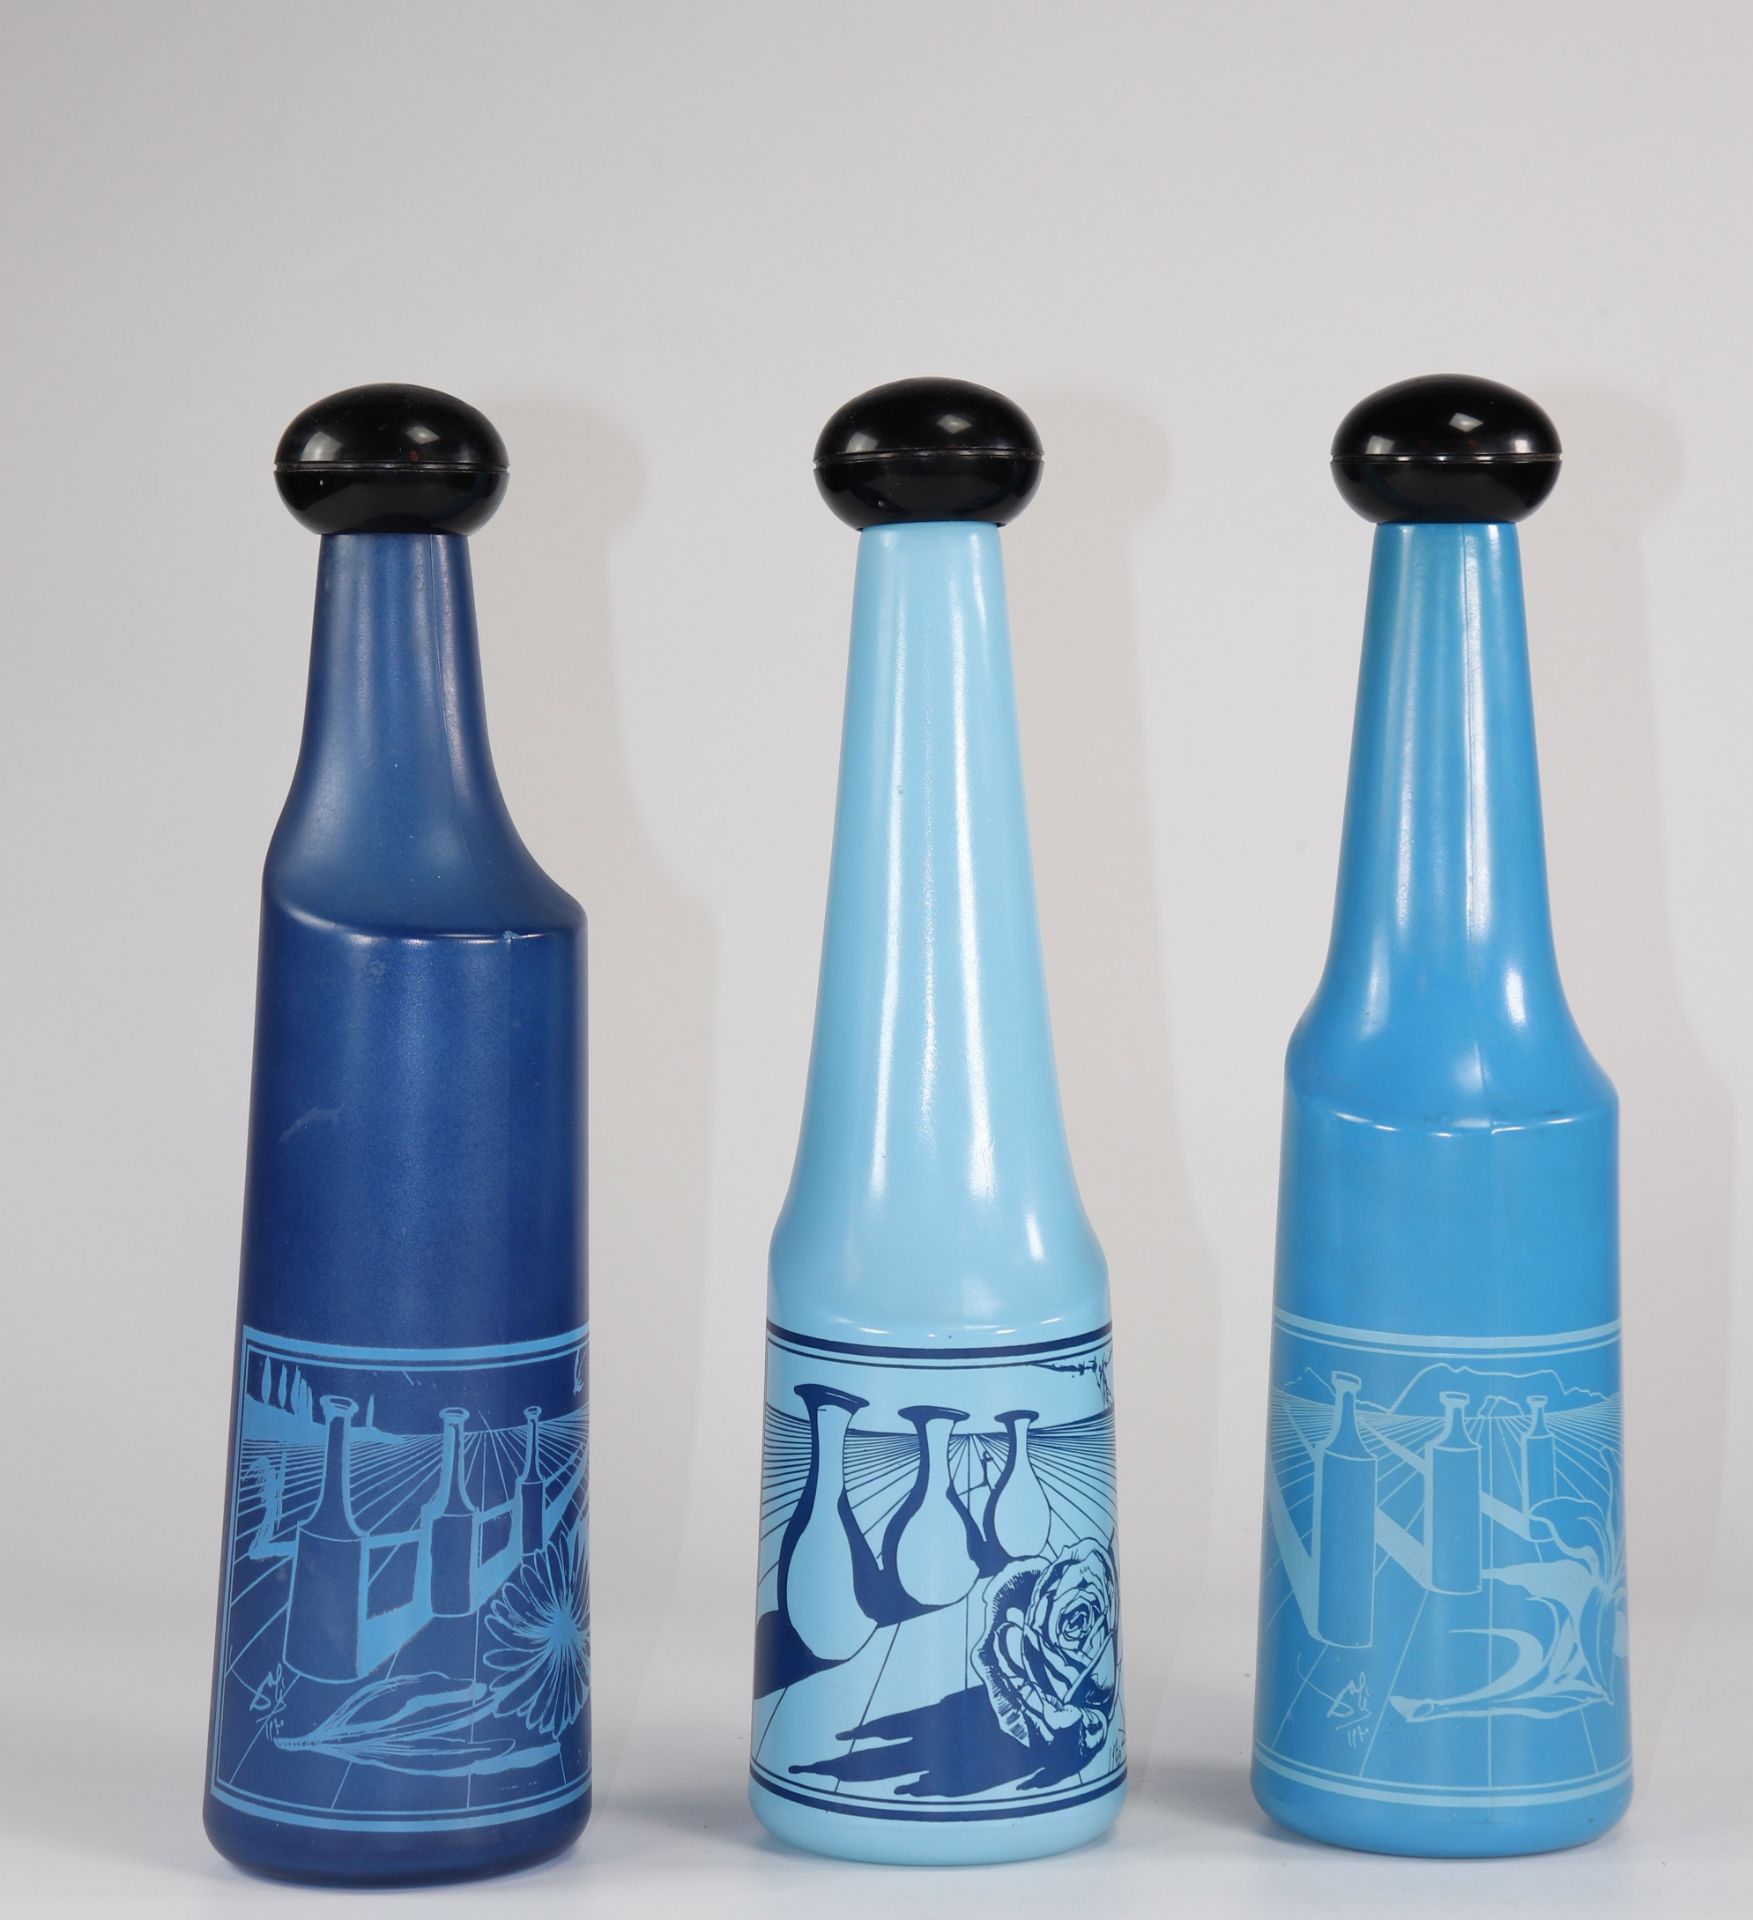 Salvador Dali"Botellas de vino" 1970-1972 Suite of three glass bottles each decorated with a differe